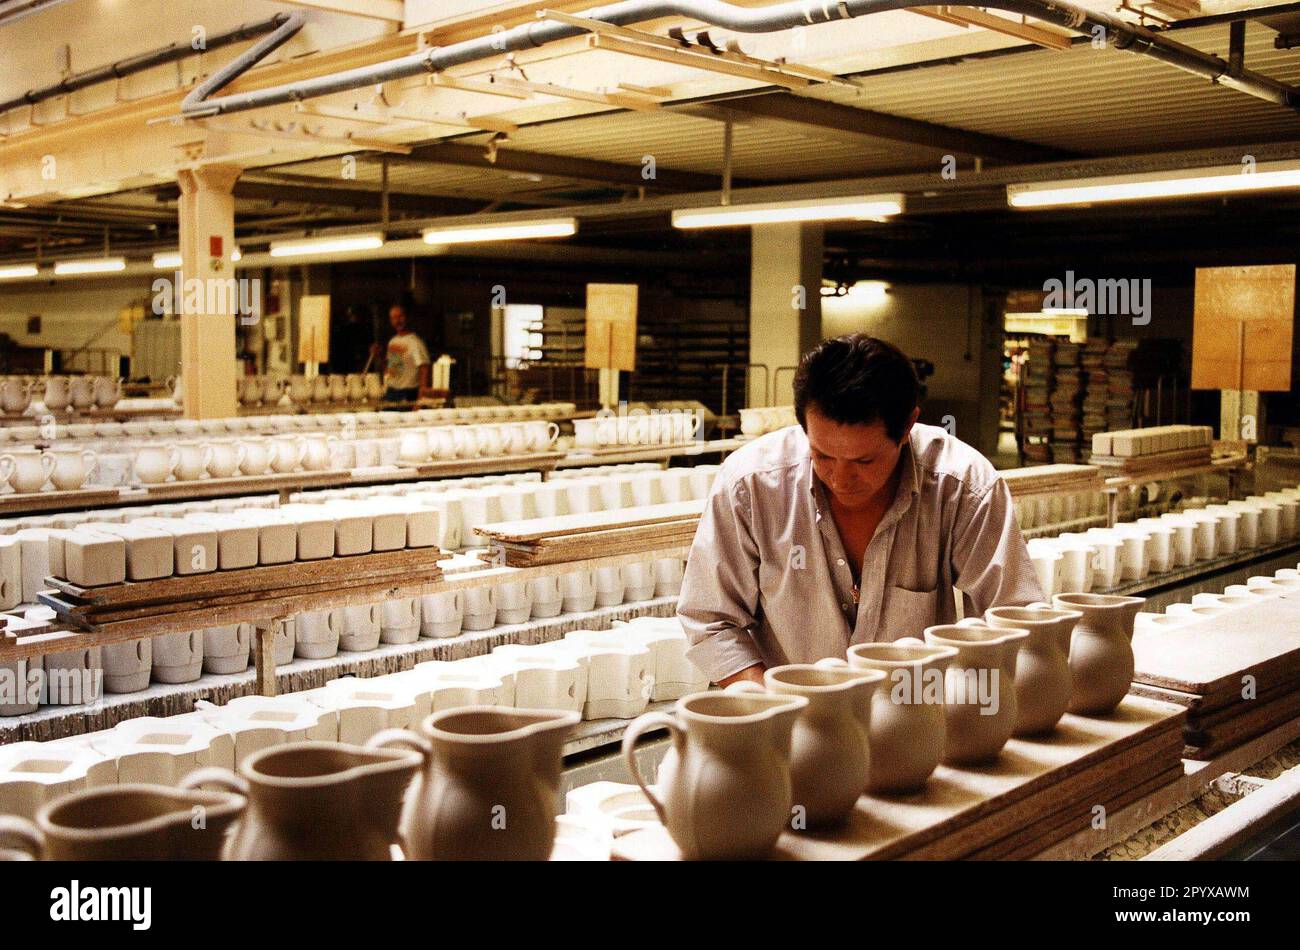 Date of recording: 01.10.1999 Villeroy and Boch: porcelain factory in Luxembourg. [automated translation] Stock Photo